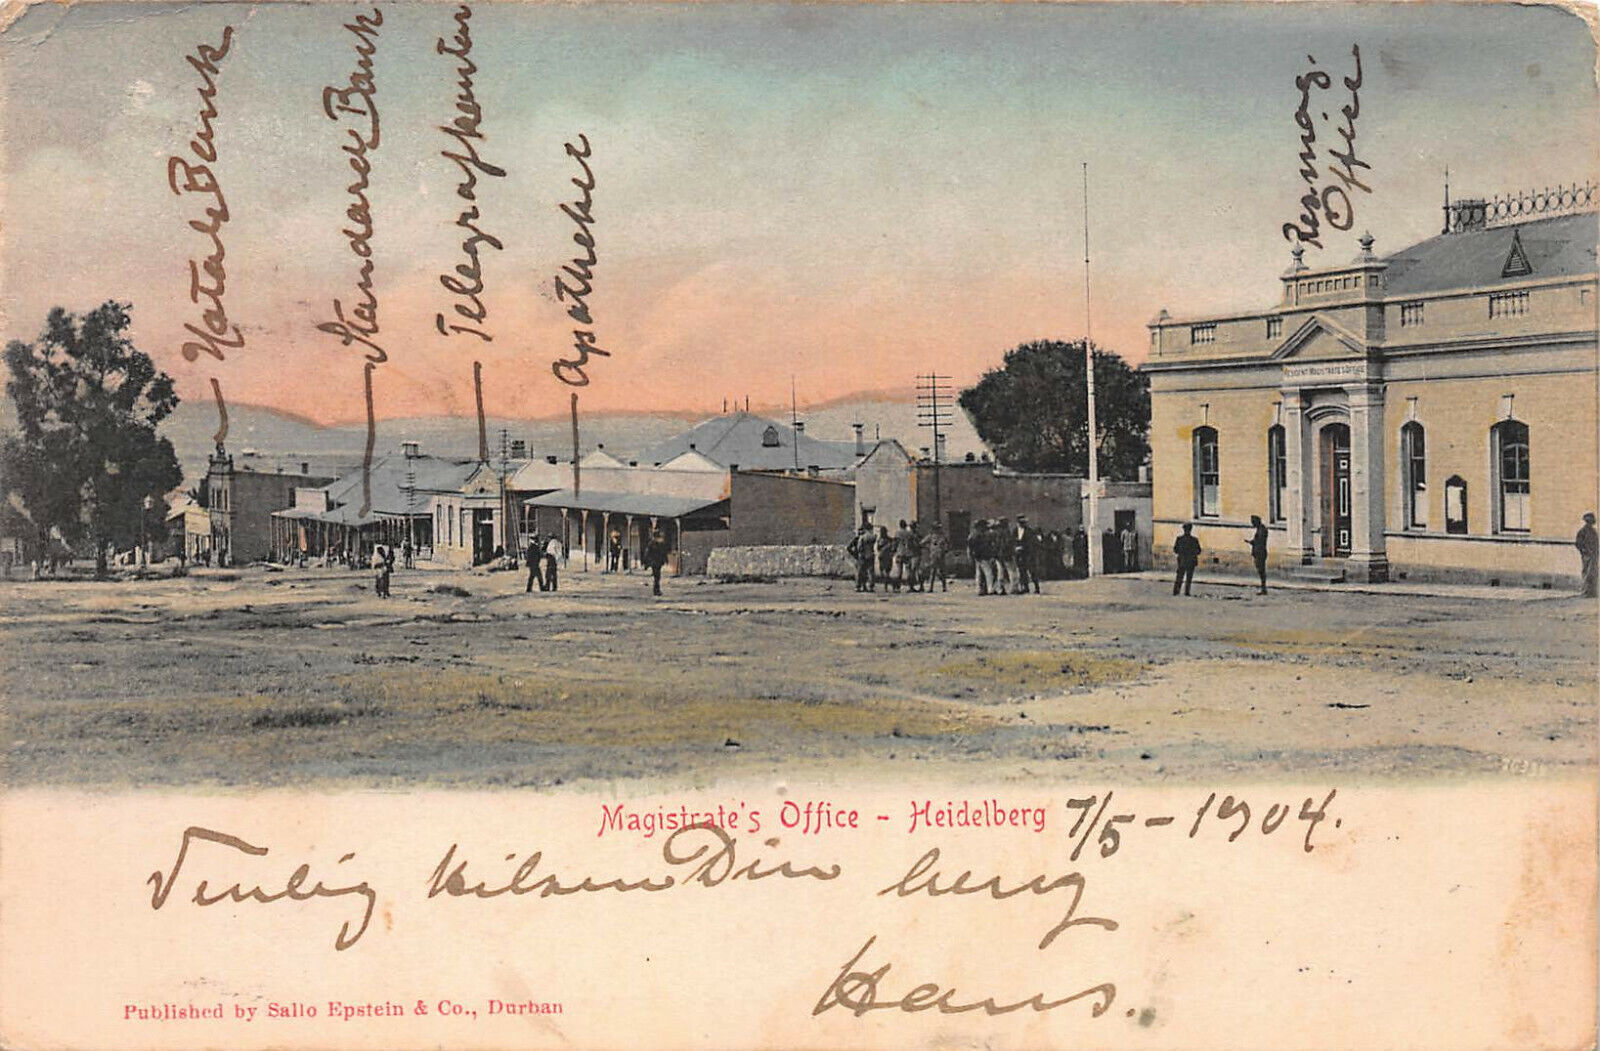 Hotel Gray, Cannes, France, Early Postcard, Used in 1904